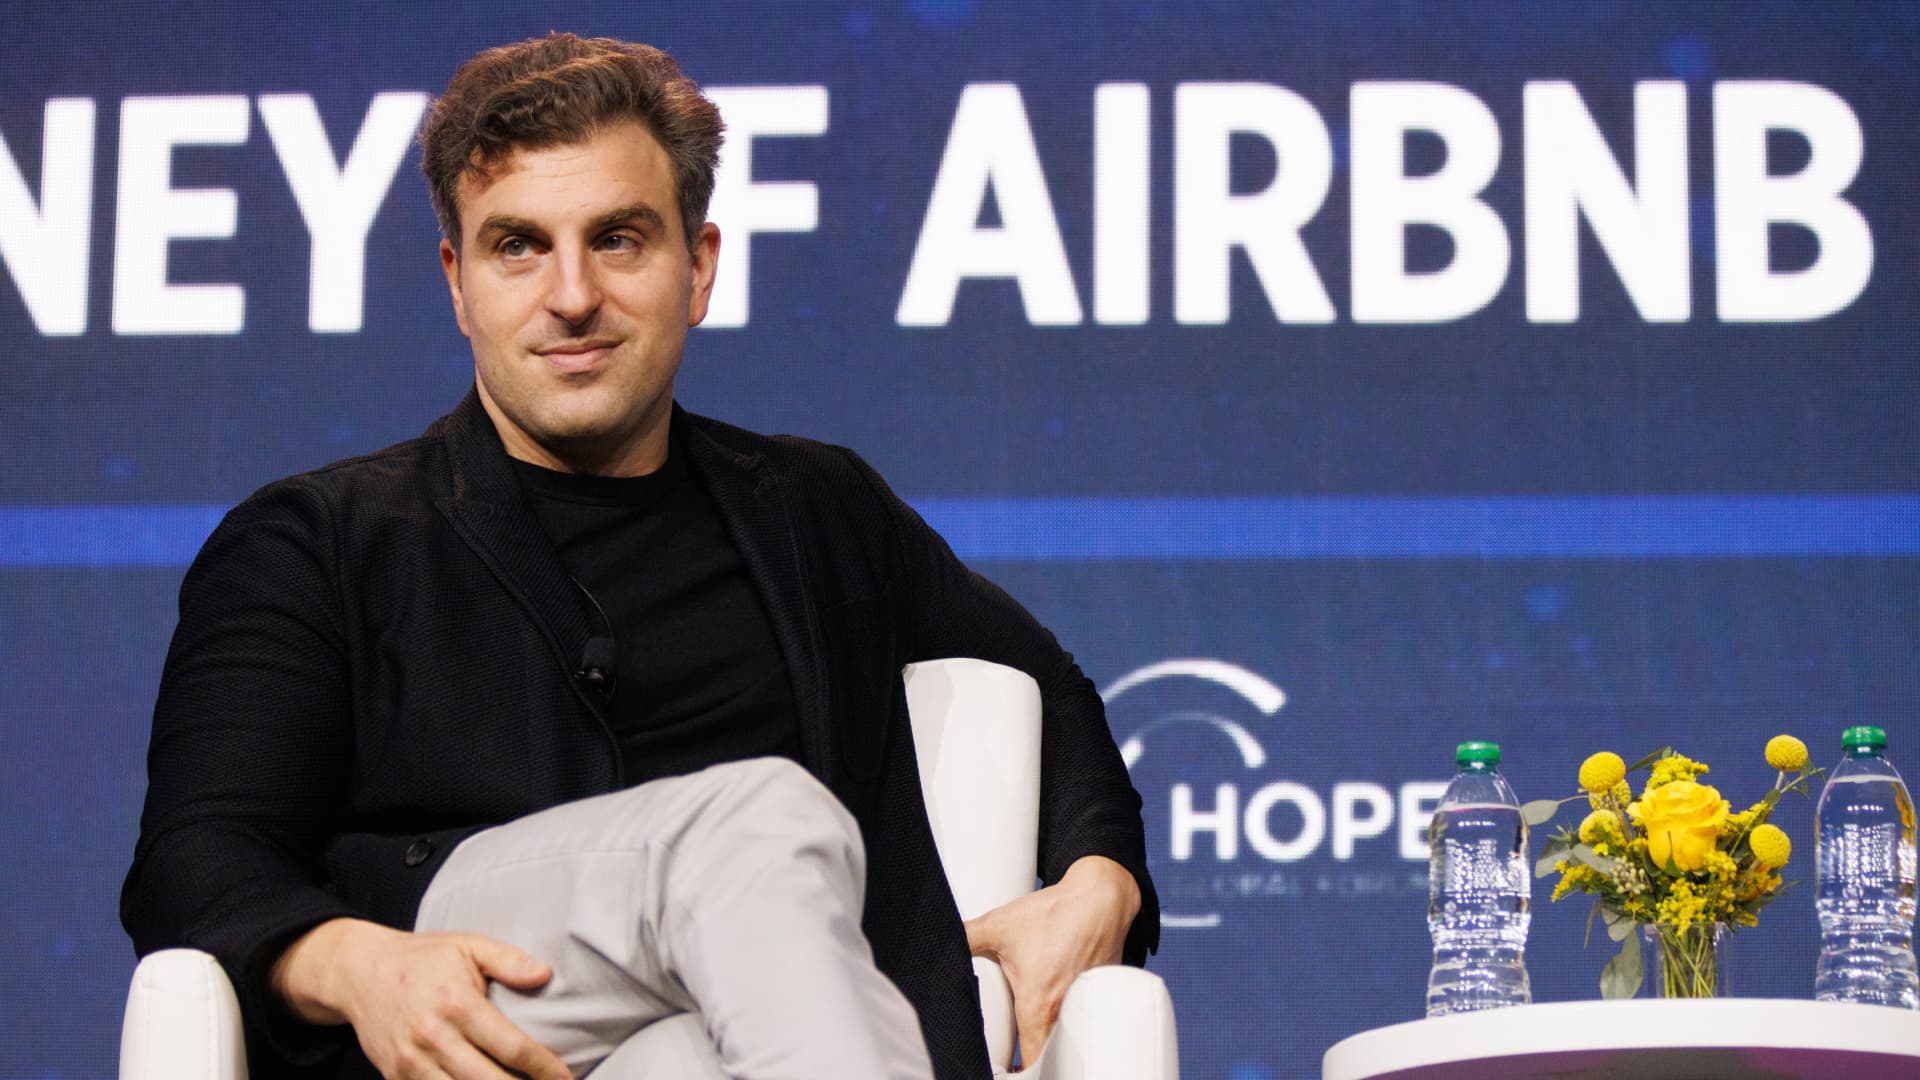 Airbnb reports better-than-expected revenue and beats on guidance